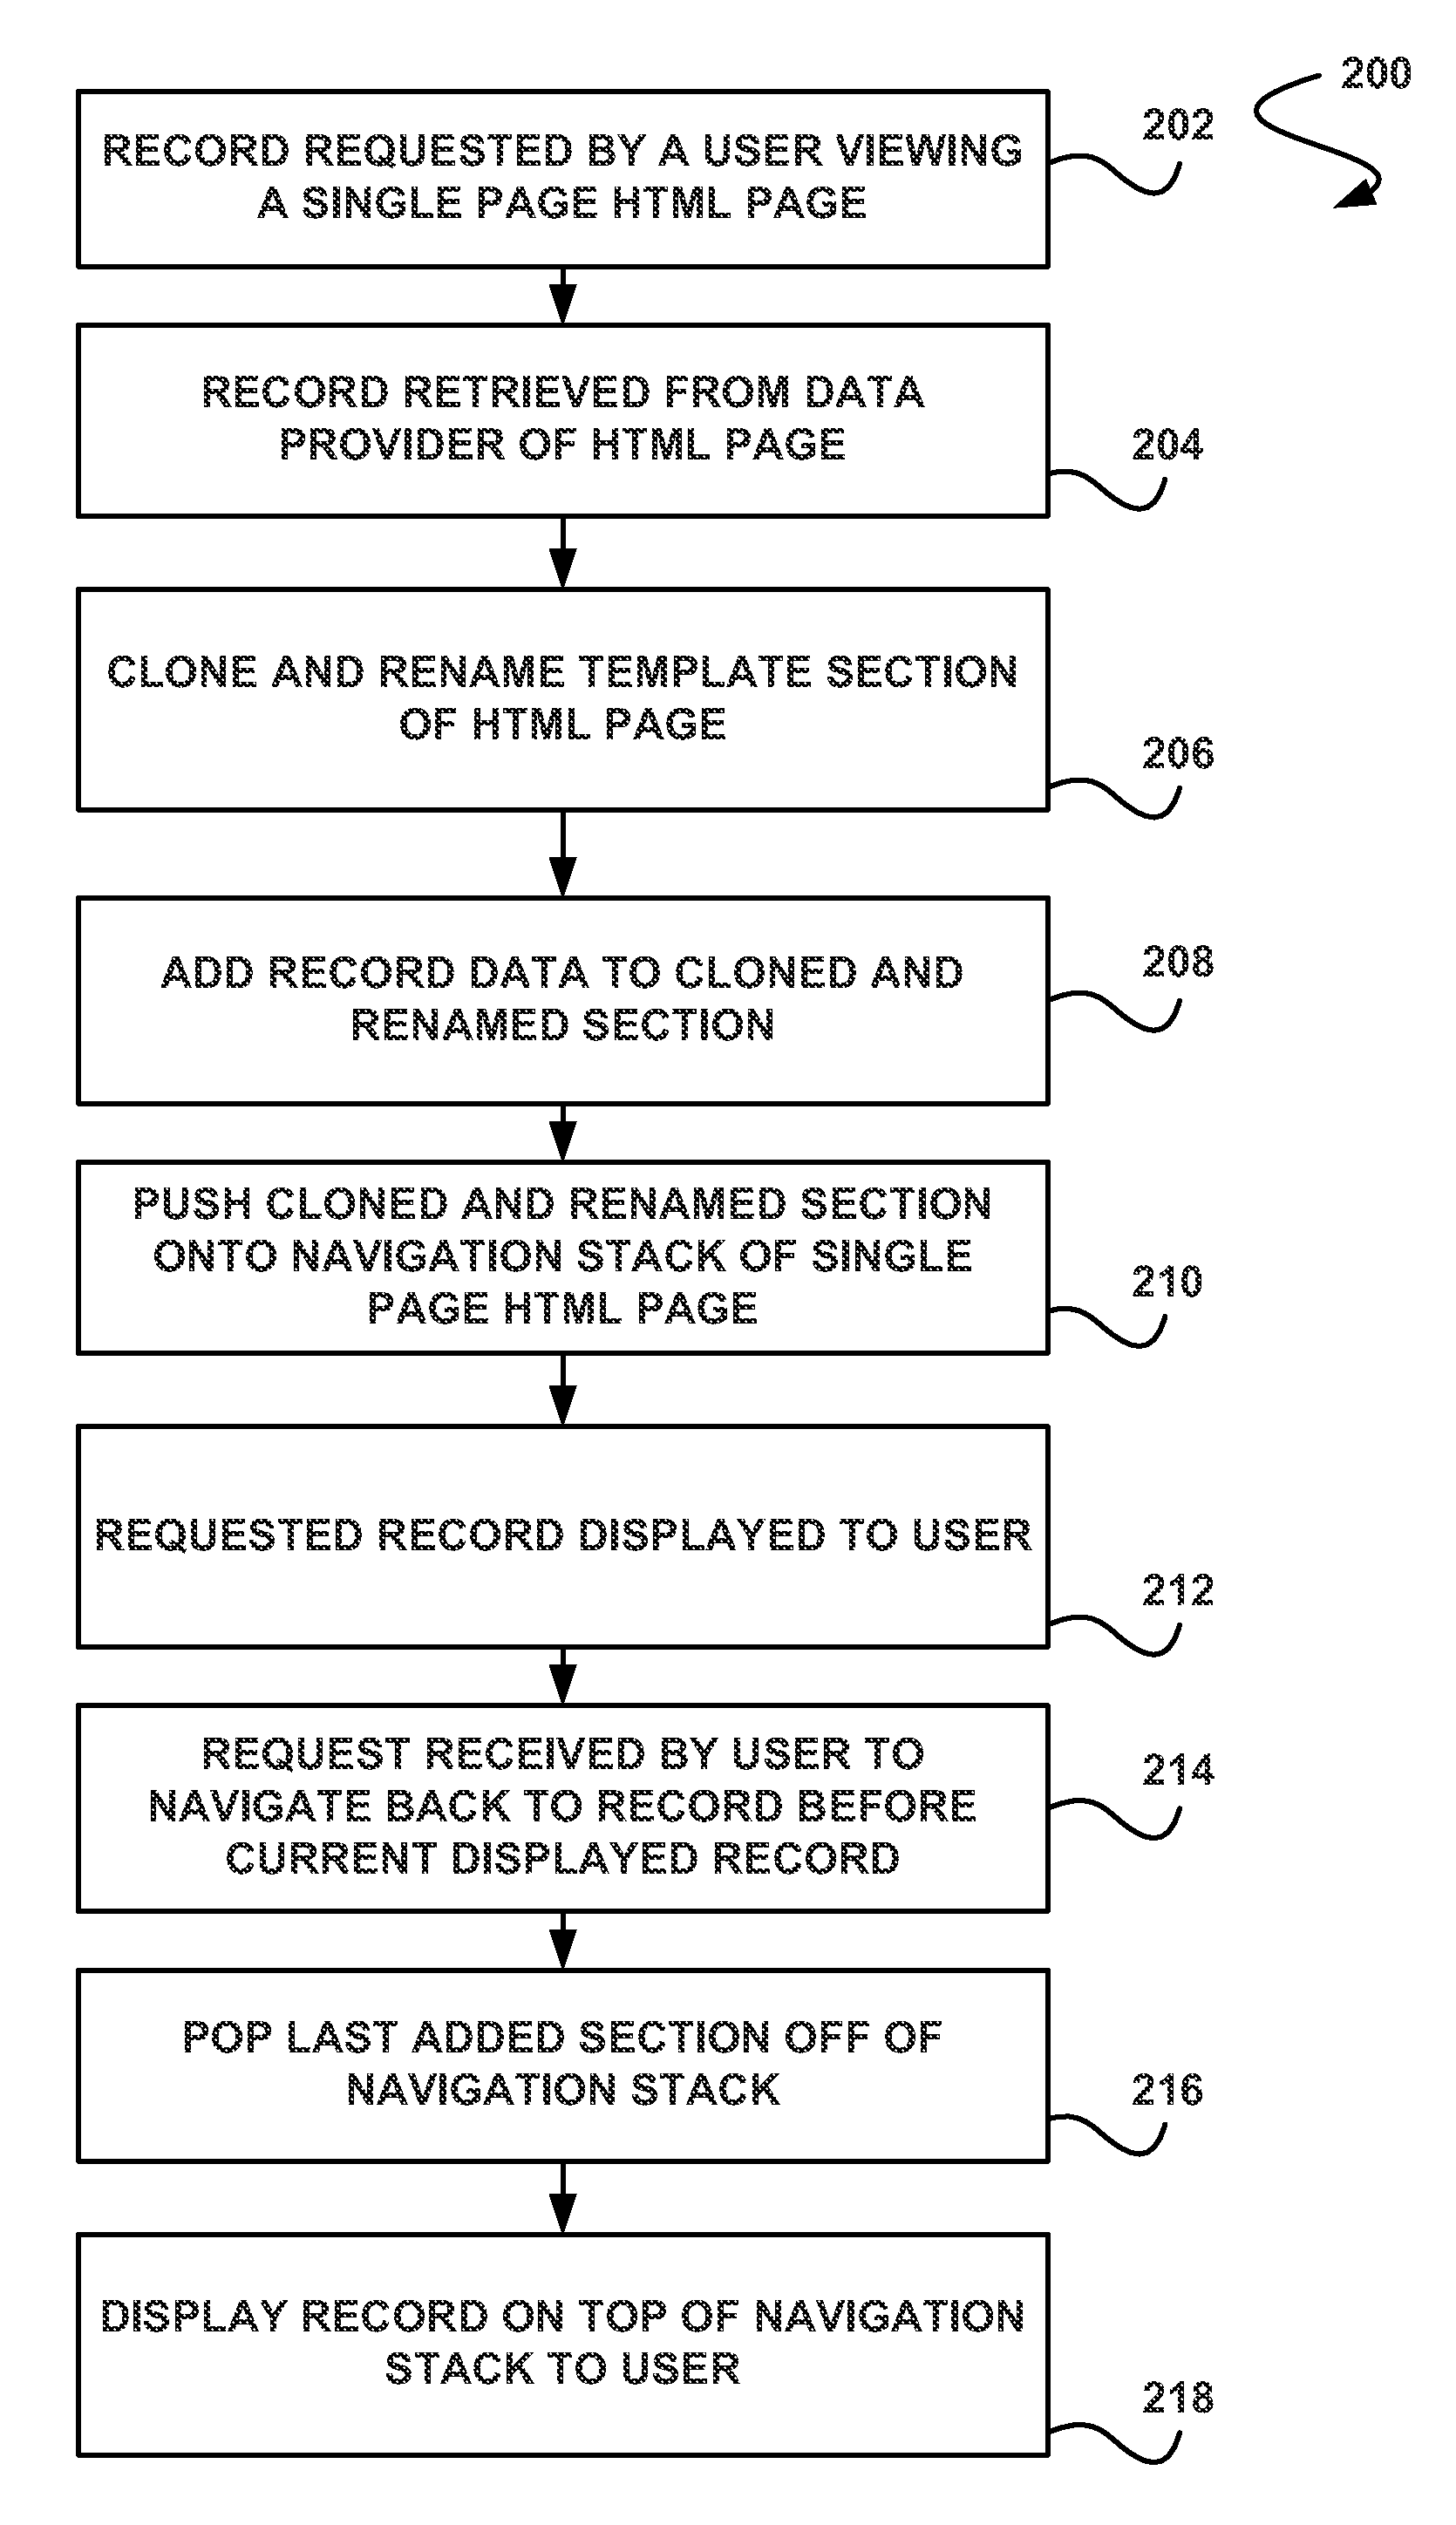 System, method and computer program product for navigating content on a single page